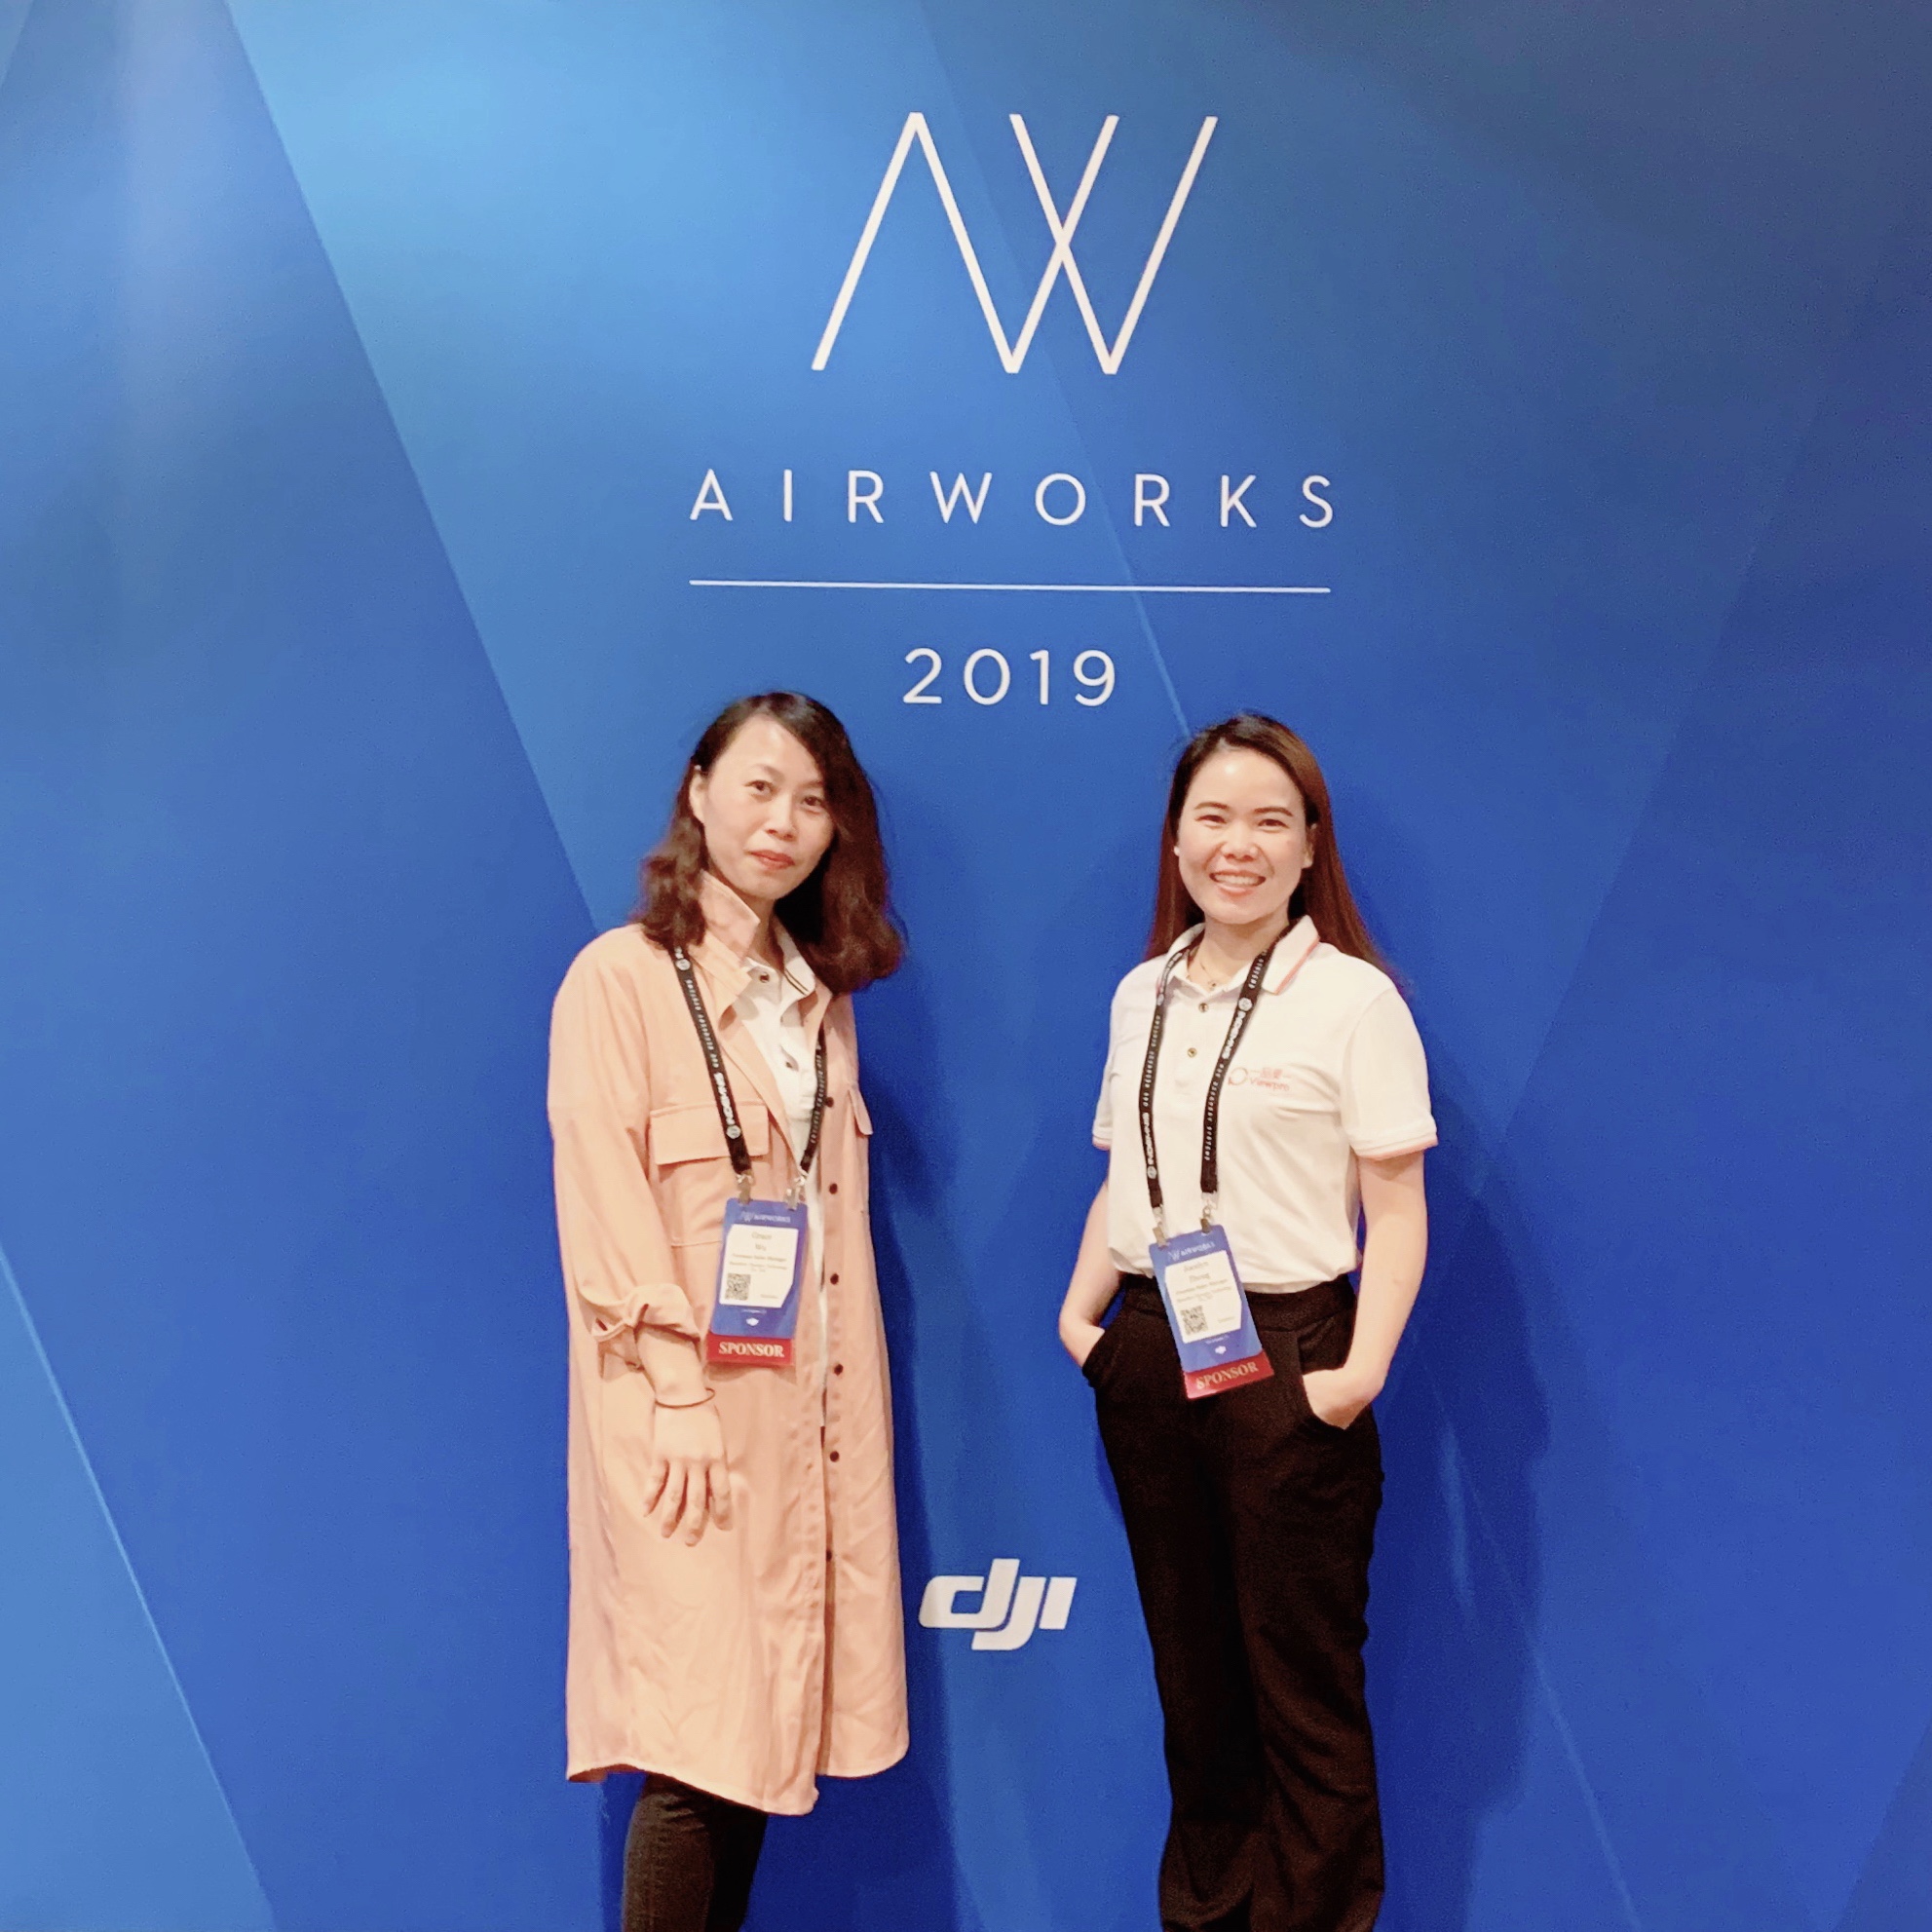 Successfully participated the 4th DJI AirWorks 2019 in LA last week (Sep. 24th~26th).